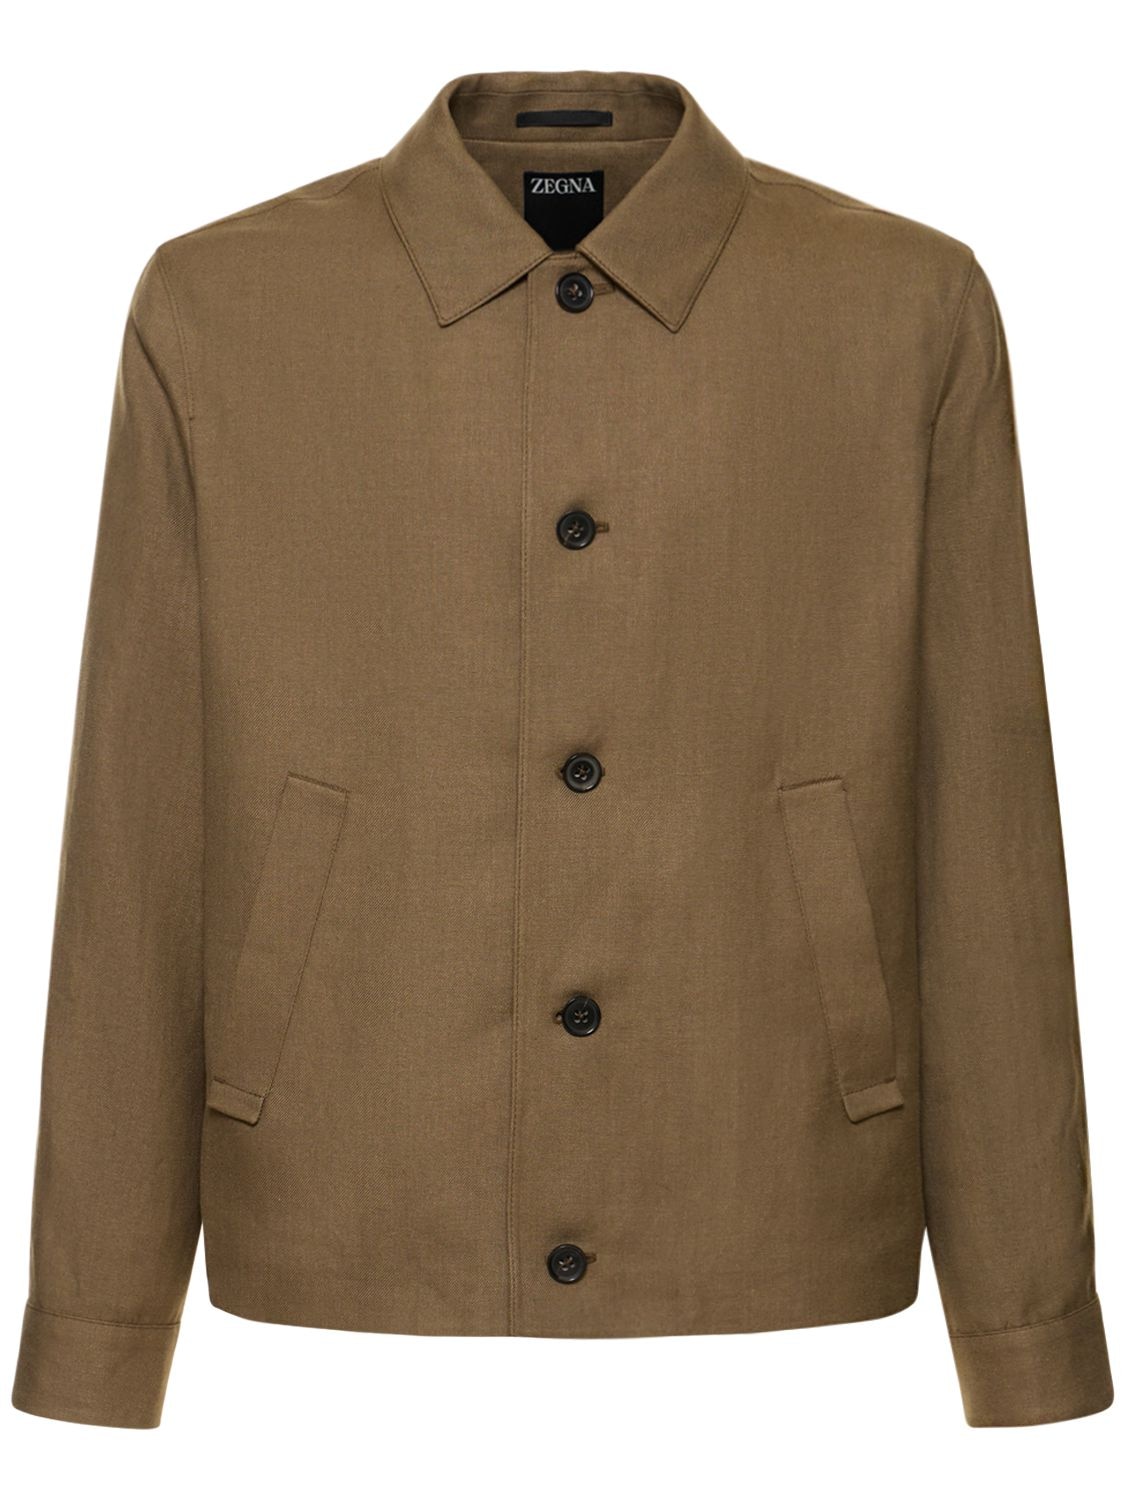 Image of Lined & Wool Chore Jacket